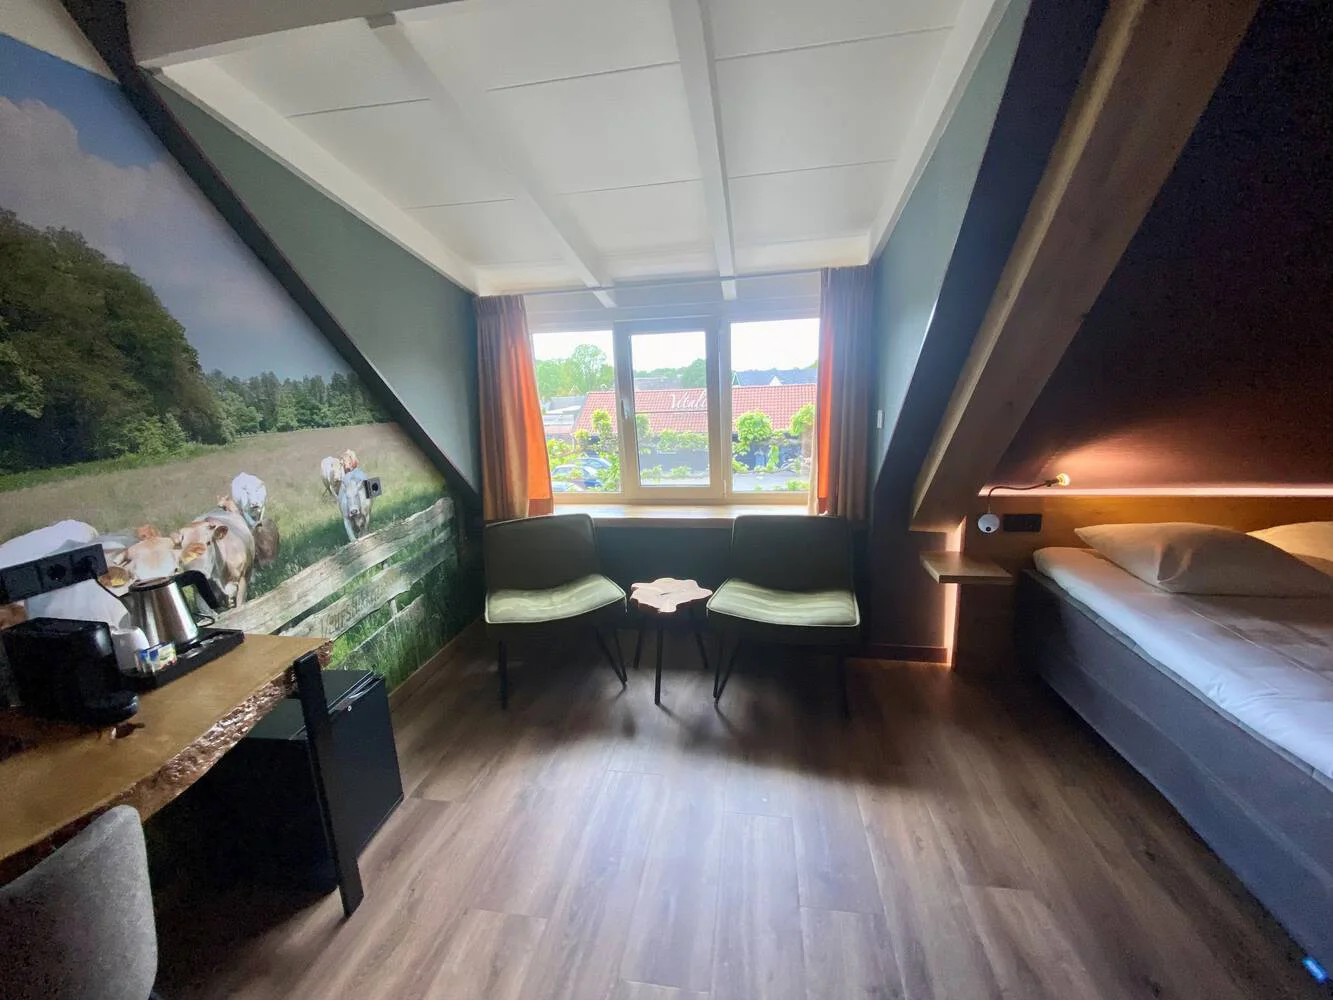 A Themed Luxury Room - A unique stay in Drenthe